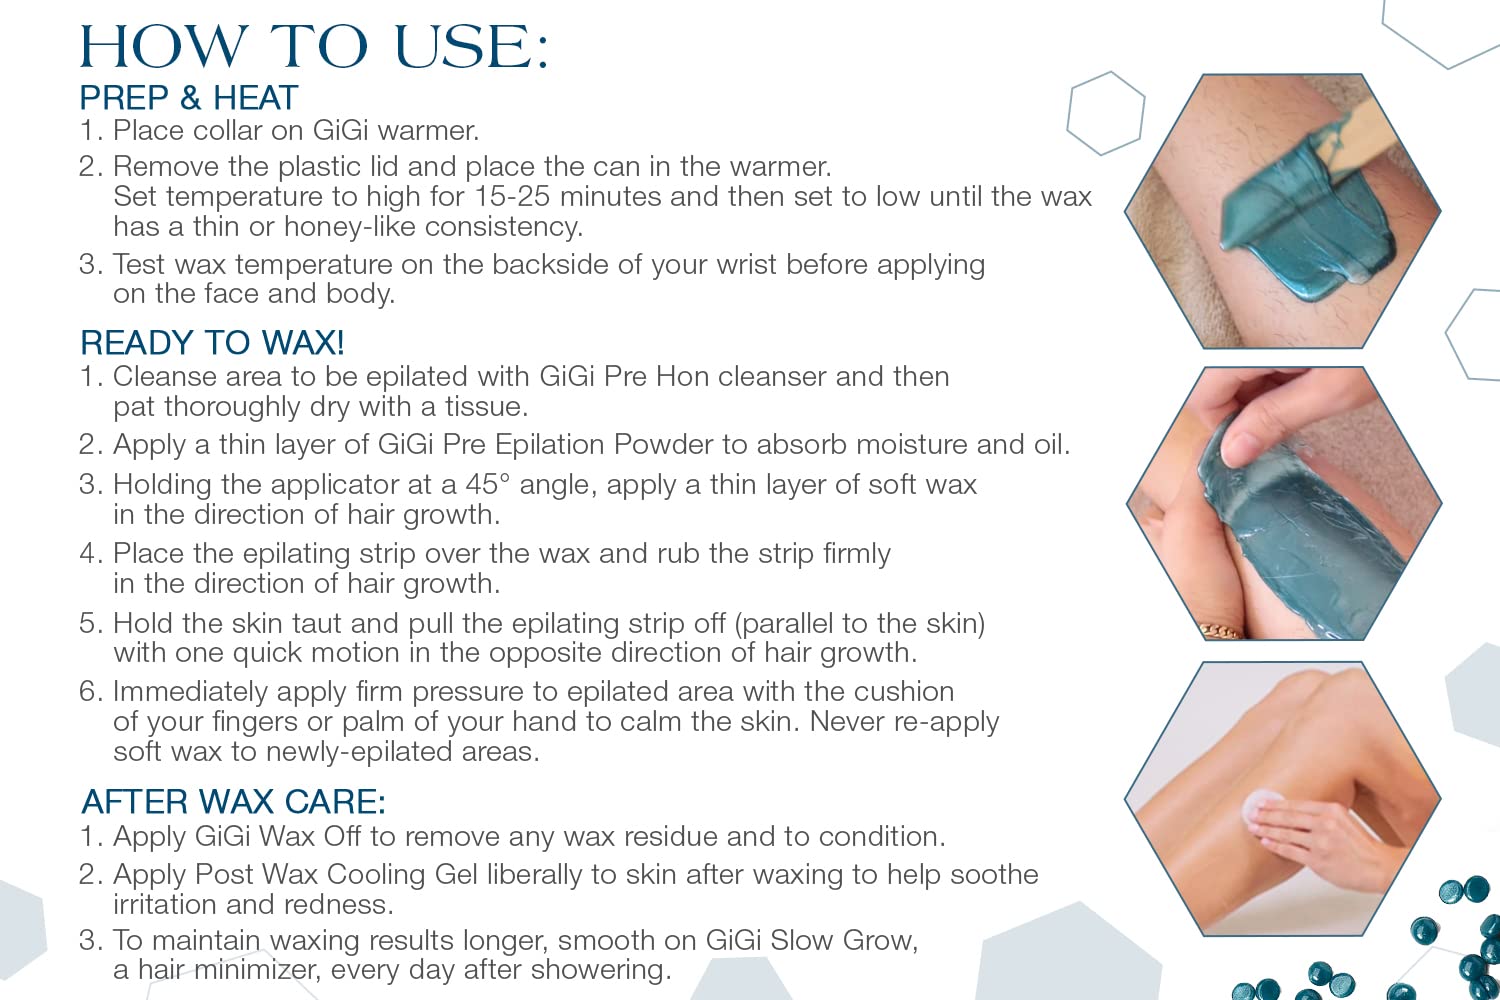 GiGi Hard Wax Beads, Soothing Azulene Hair Removal Wax for Sensitive Skin, 14 oz : Beauty & Personal Care